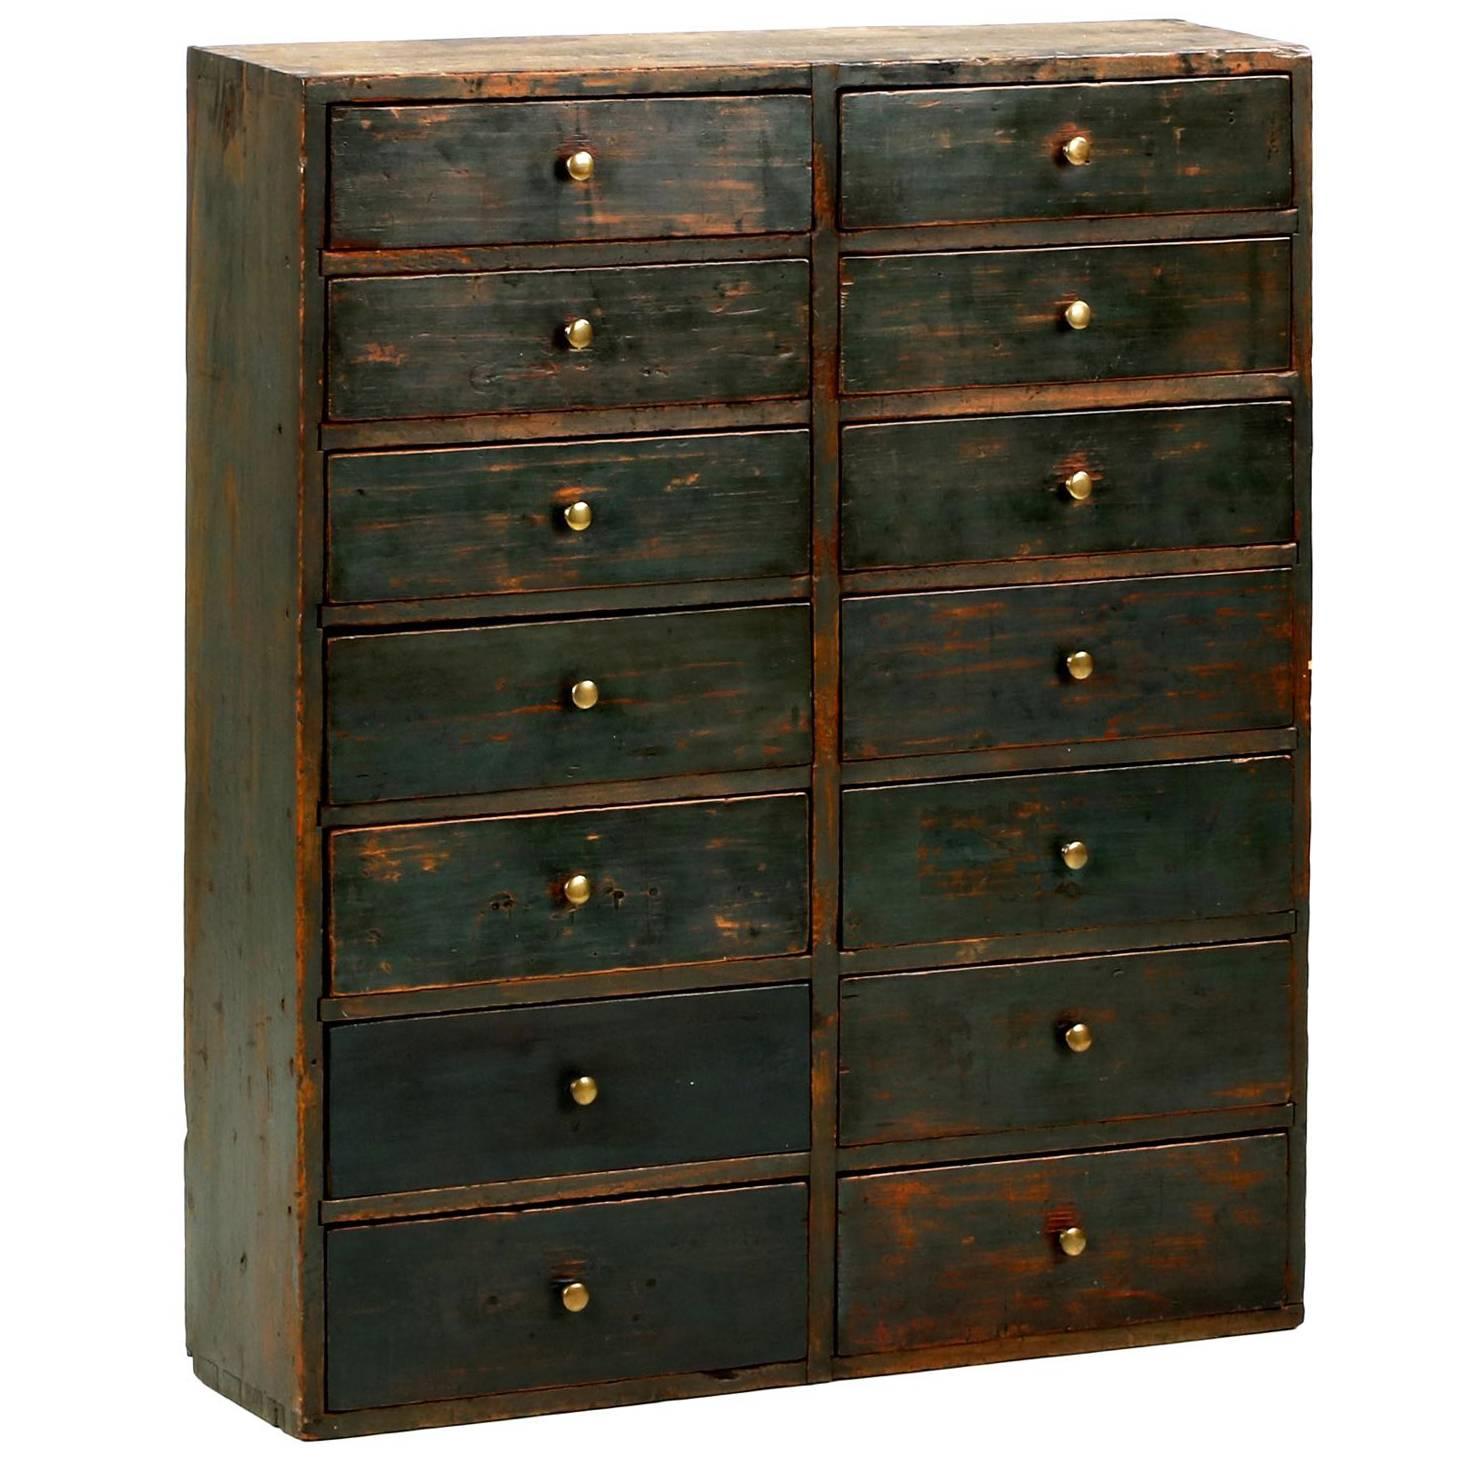 American Scrubbed Blue Painted Dovetailed Pine Apothecary Cabinet, 19th Century